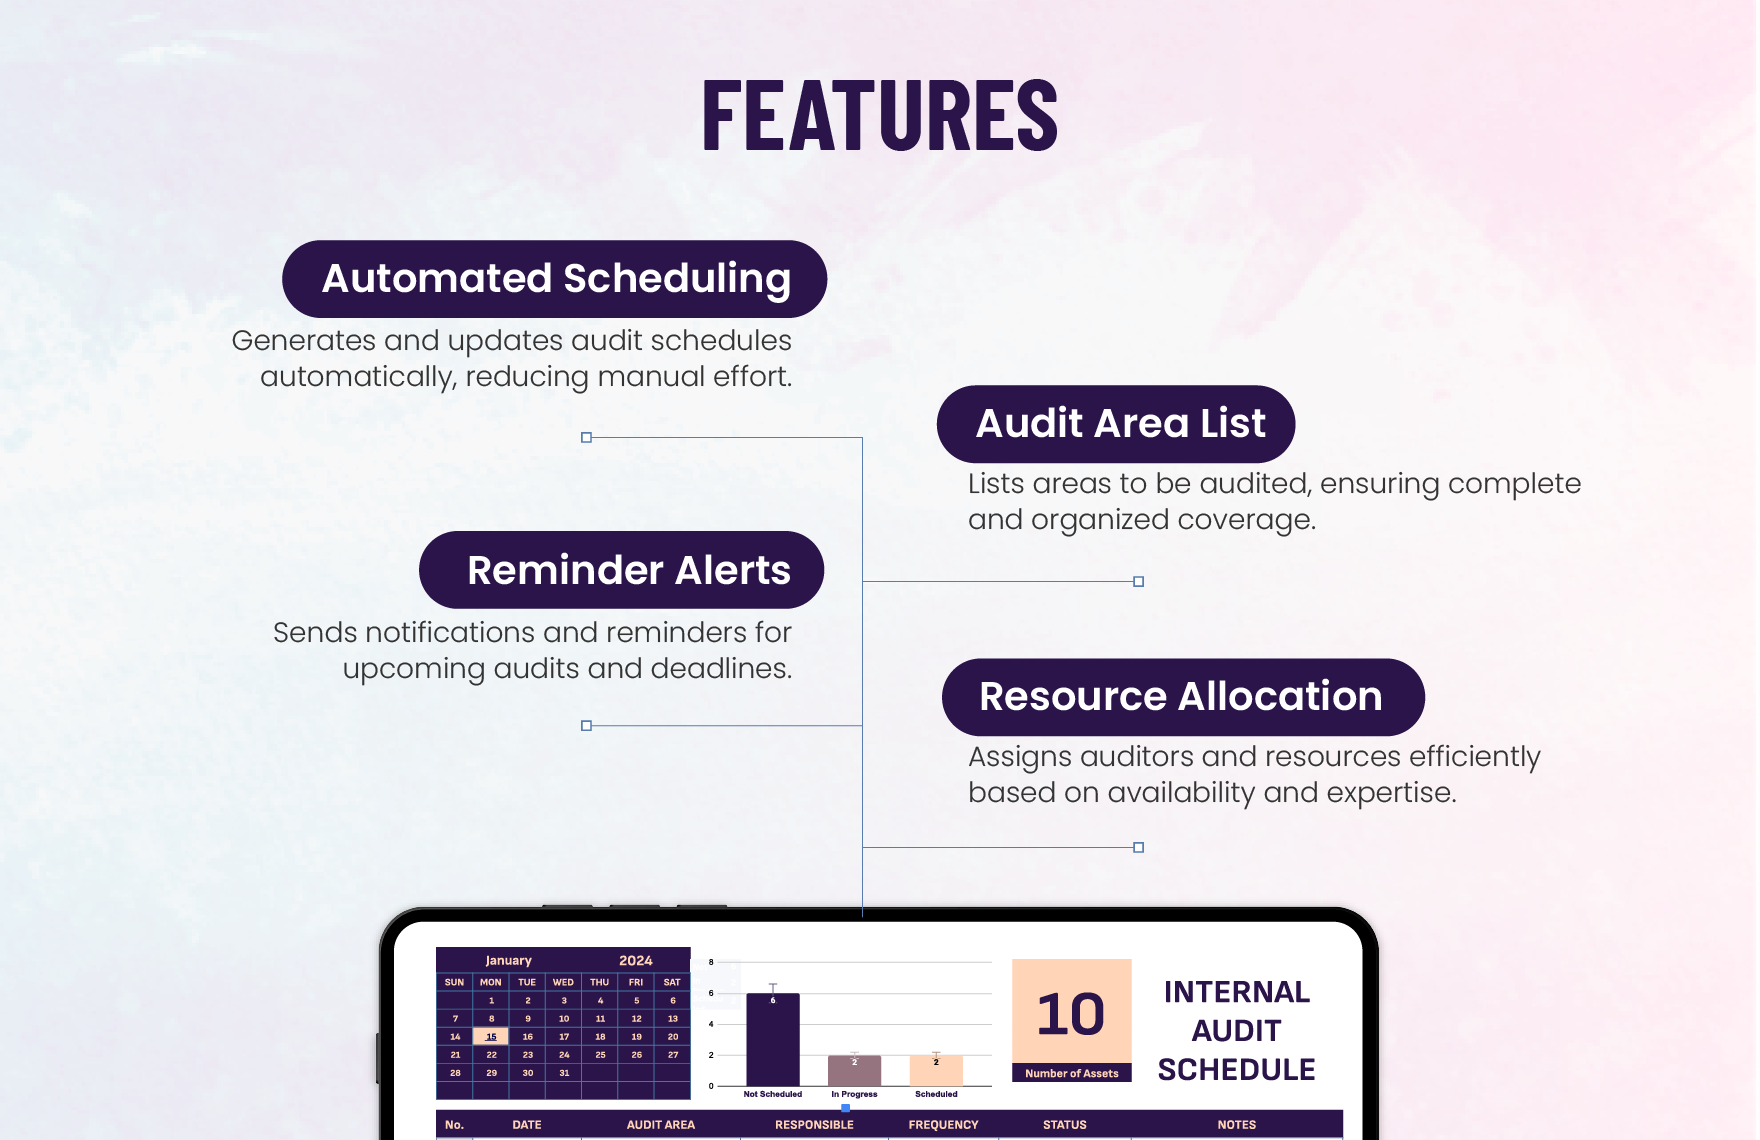 Automated Internal Audit Schedule Template